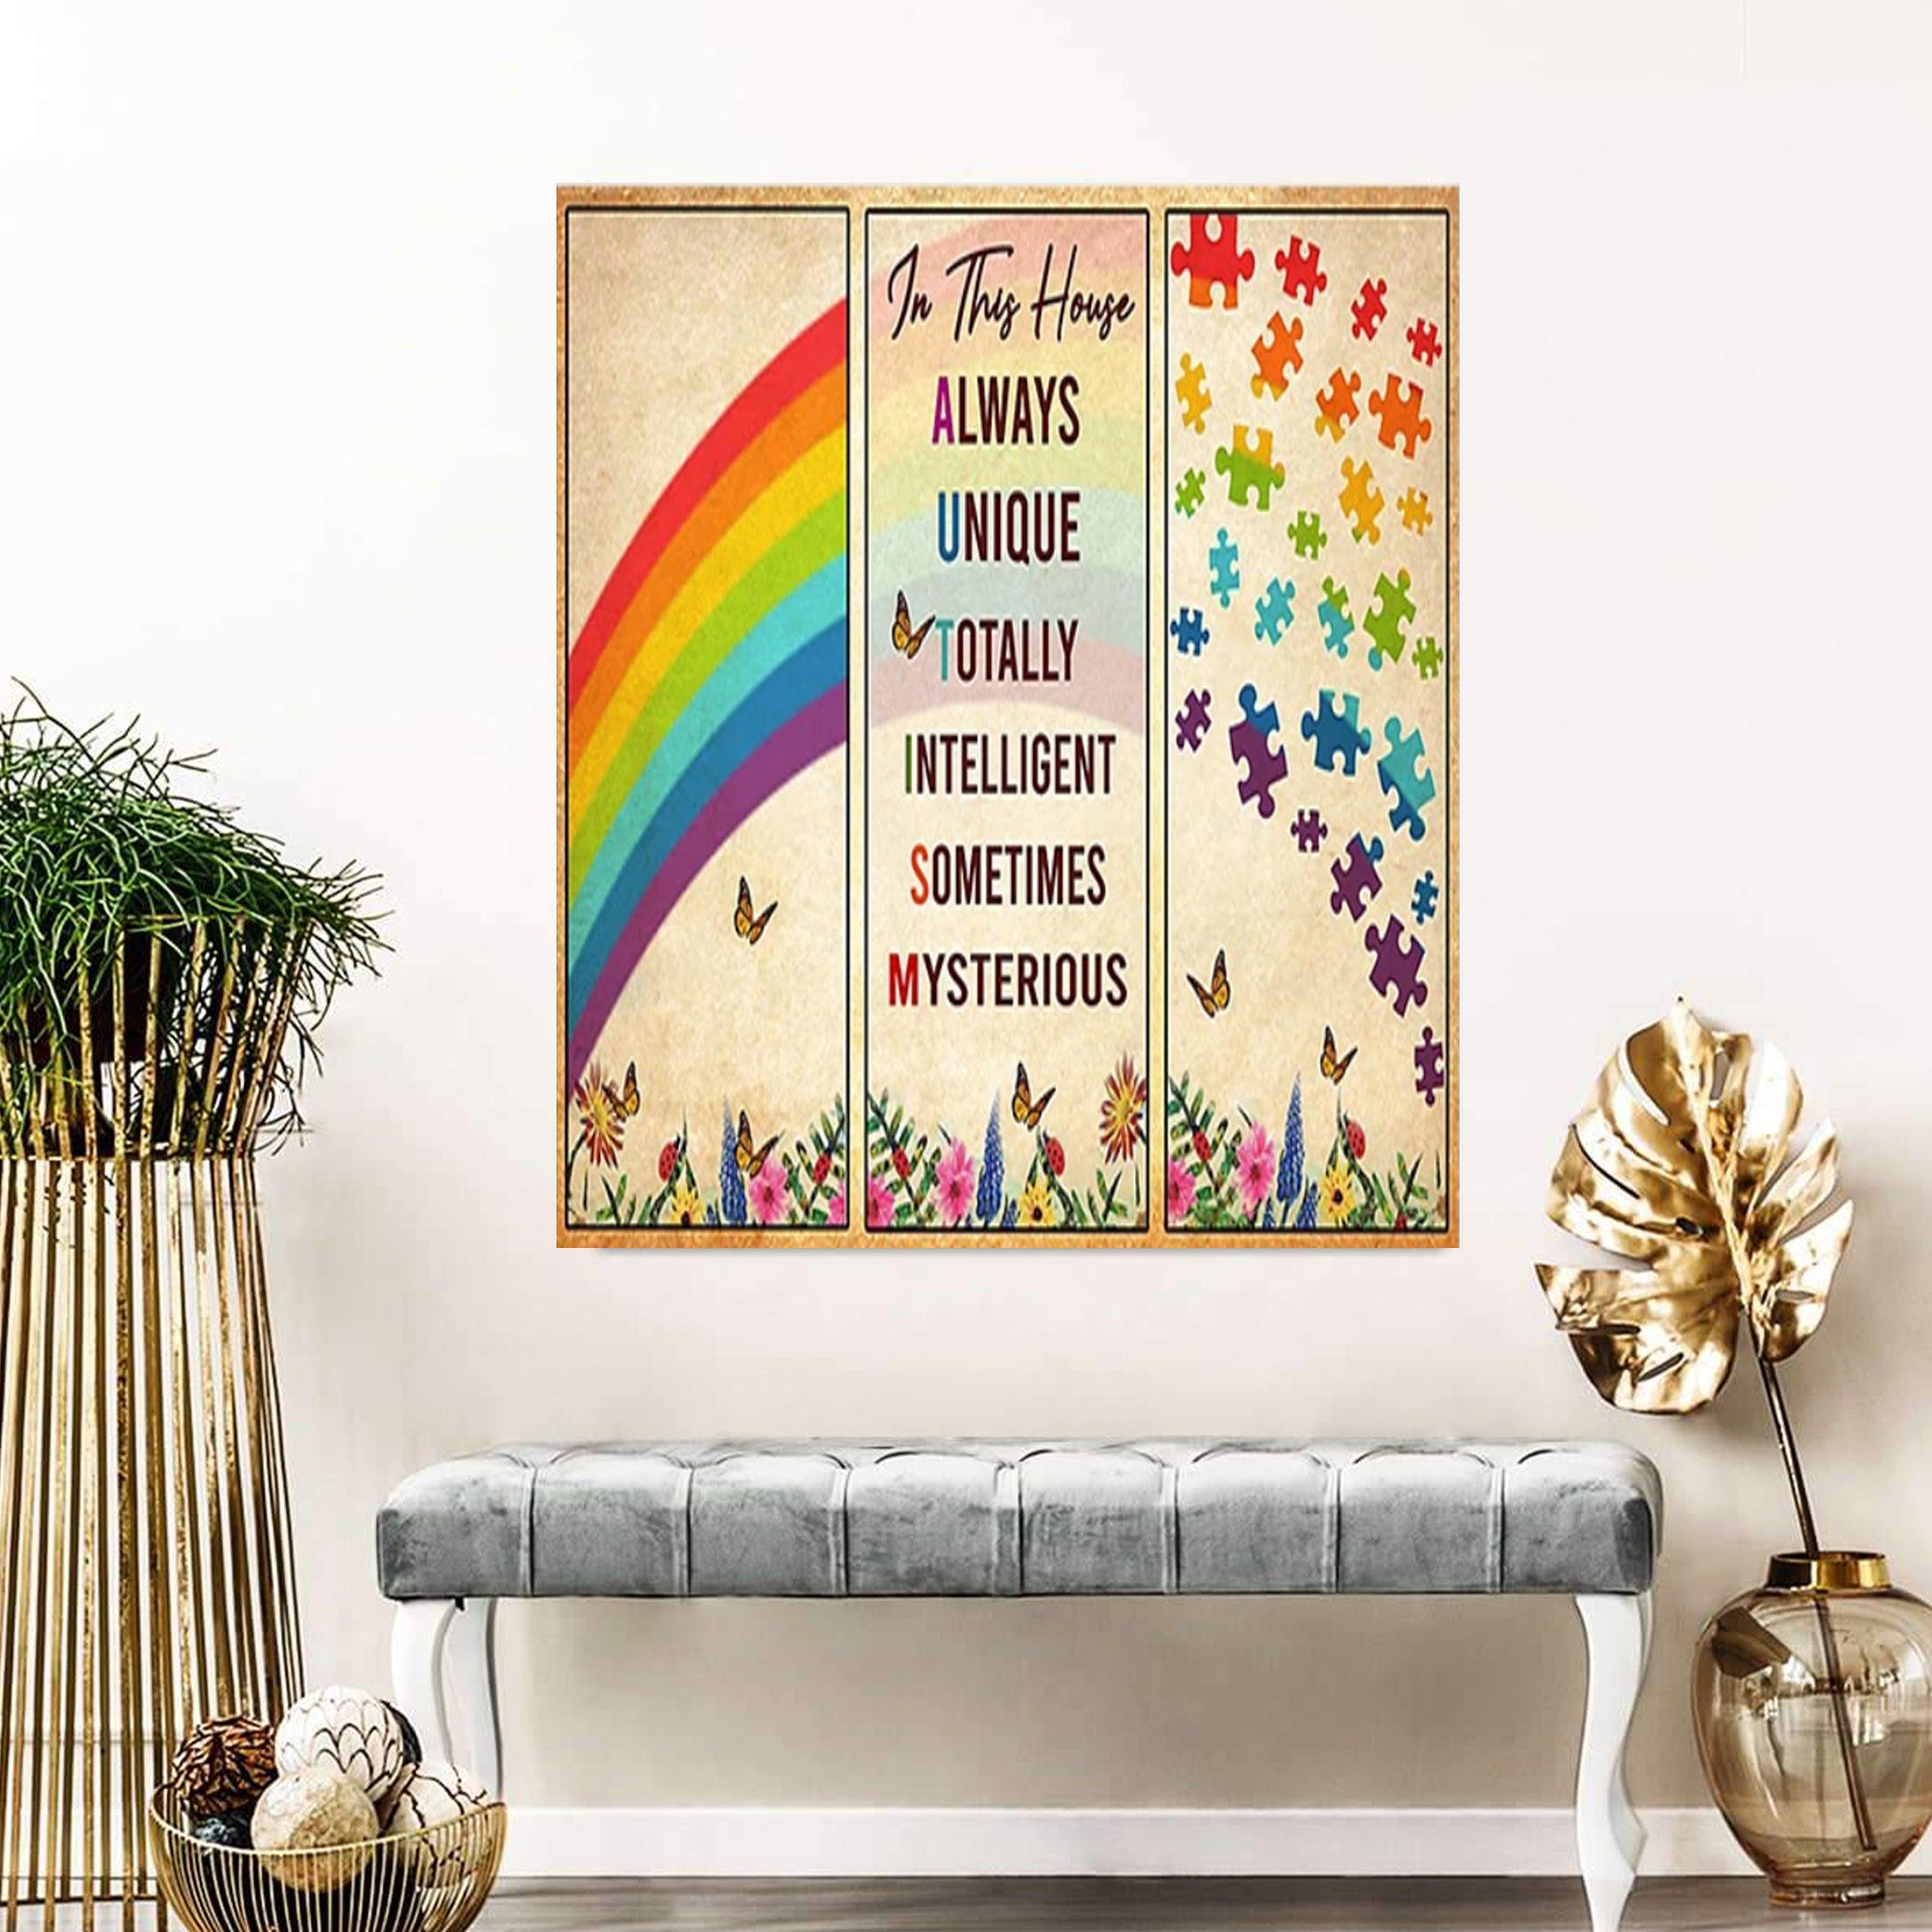 Autism Poster – In This House Always Unique Totally Intelligent Sometimes Mysterious